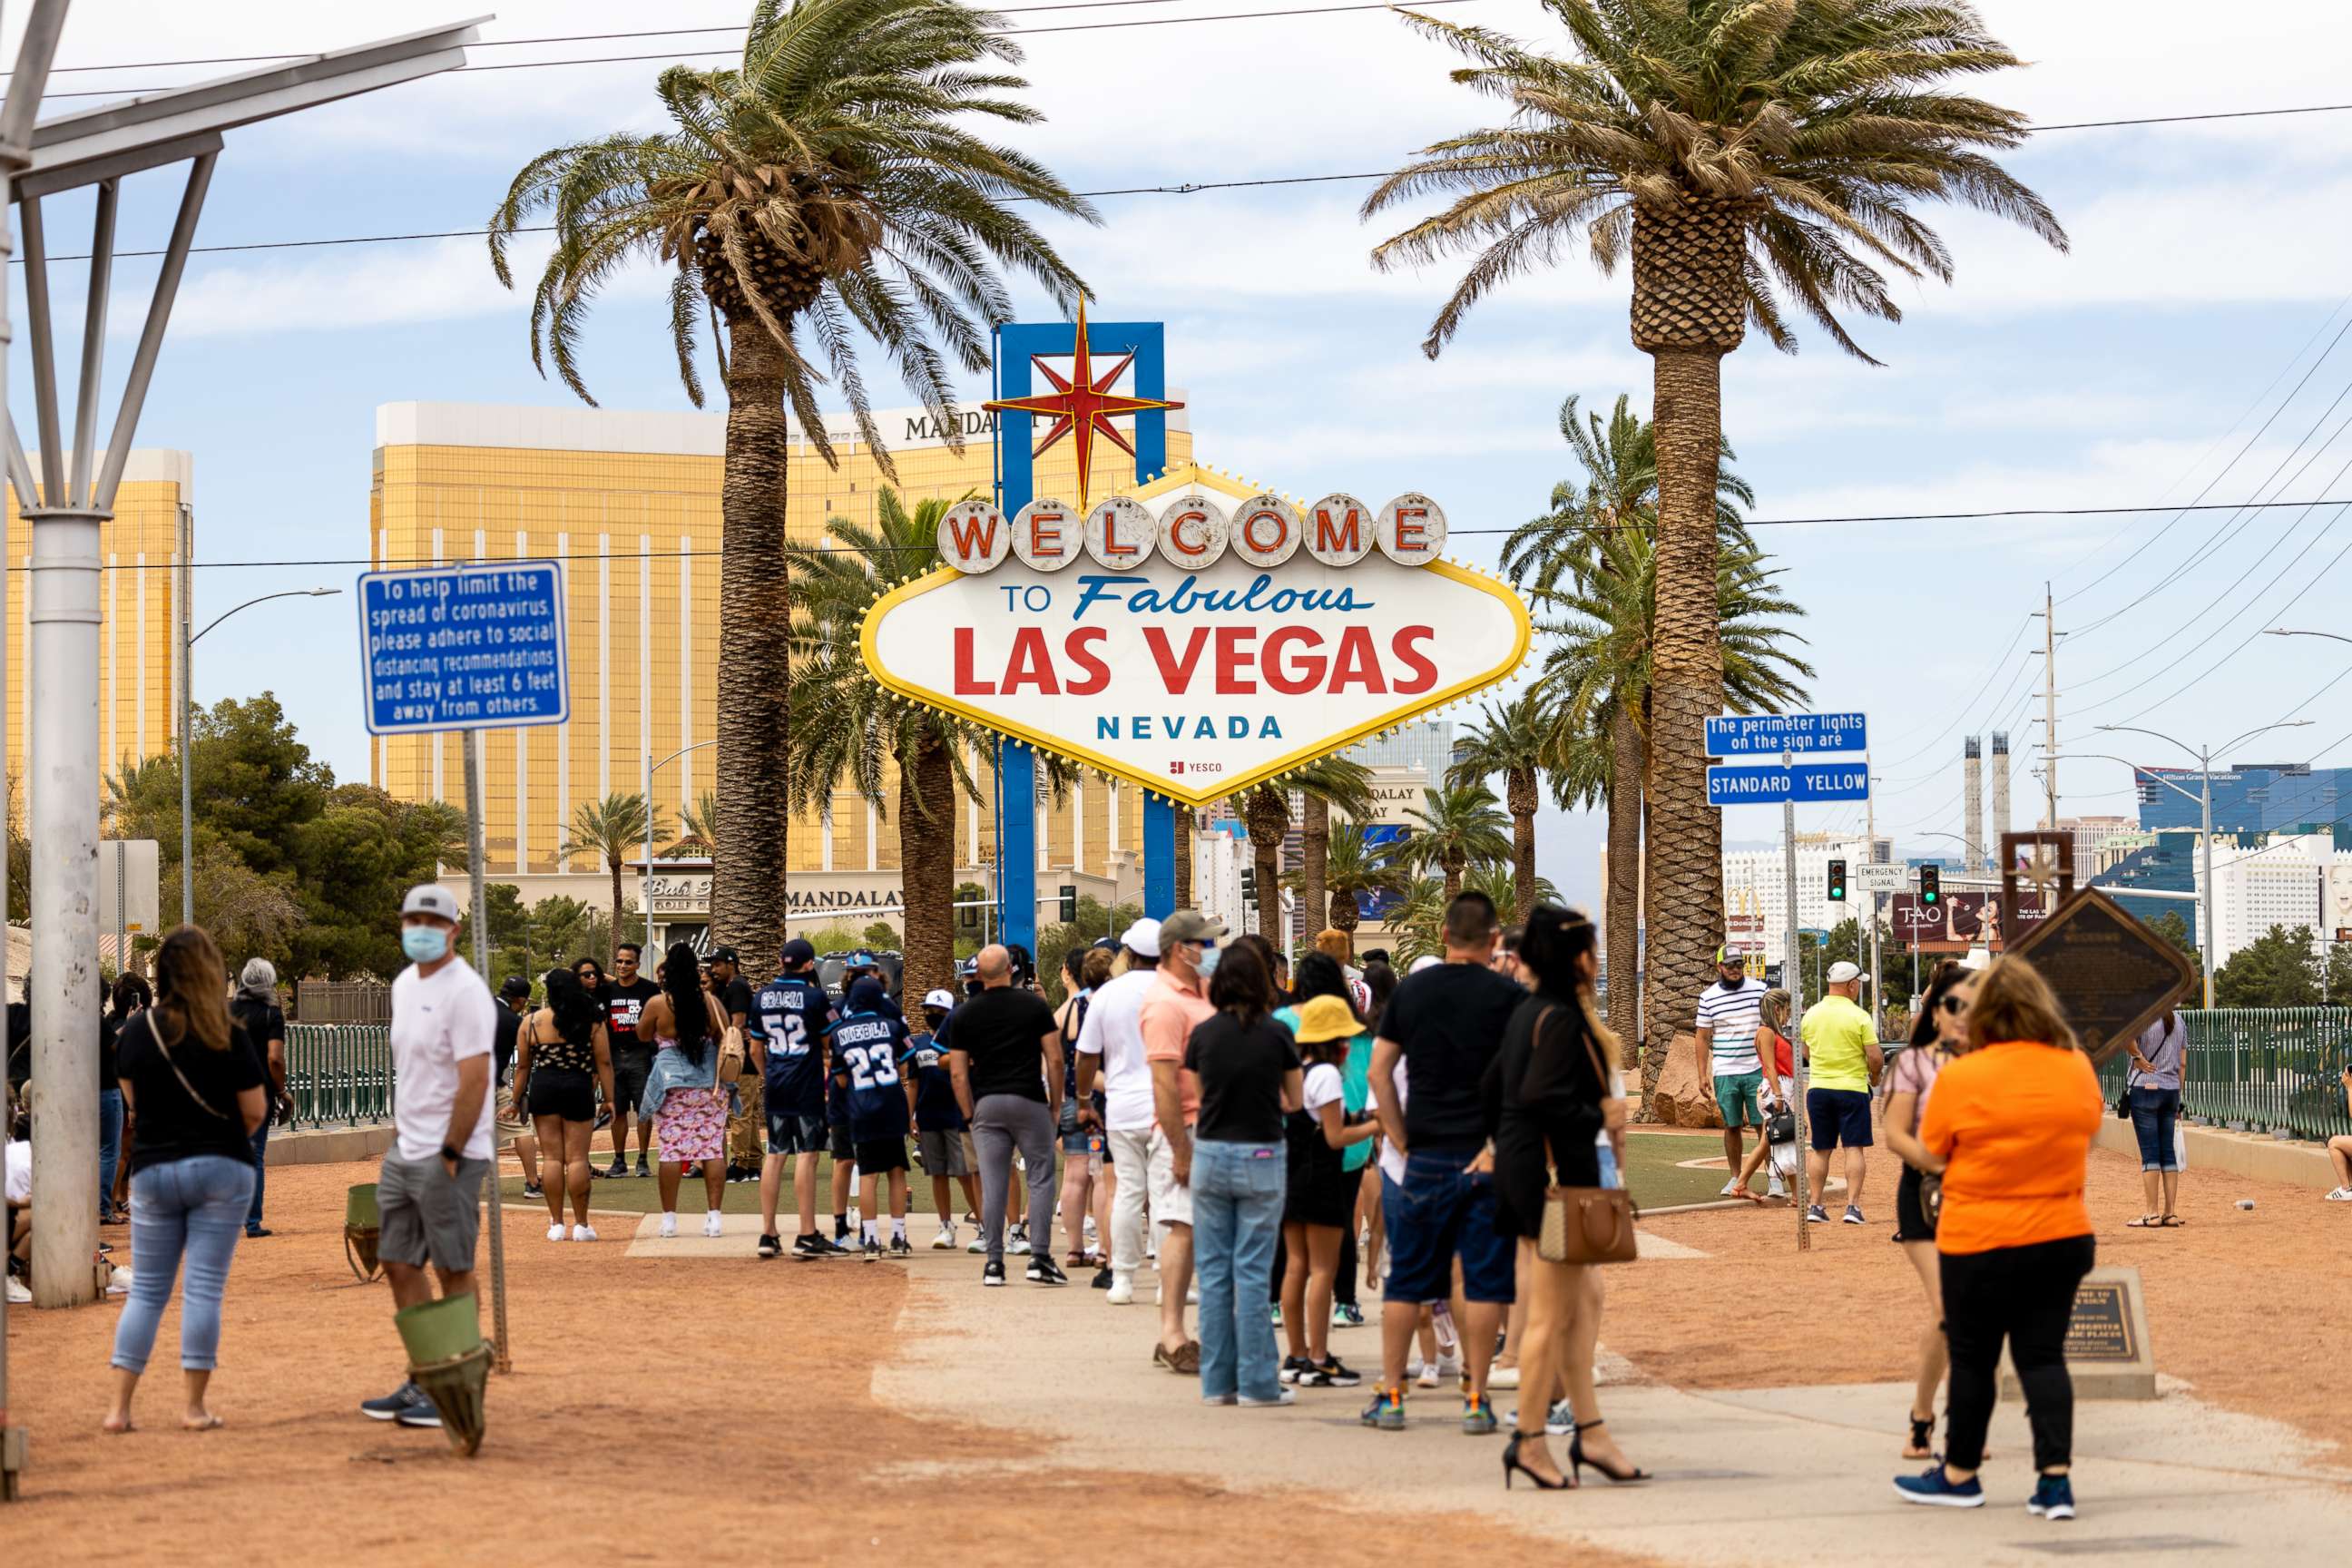 PHOTO: Tourists wait in line to take photographs with the "Welcome to Fabulous Las Vegas" sign in Las Vegas, May 1, 2020.